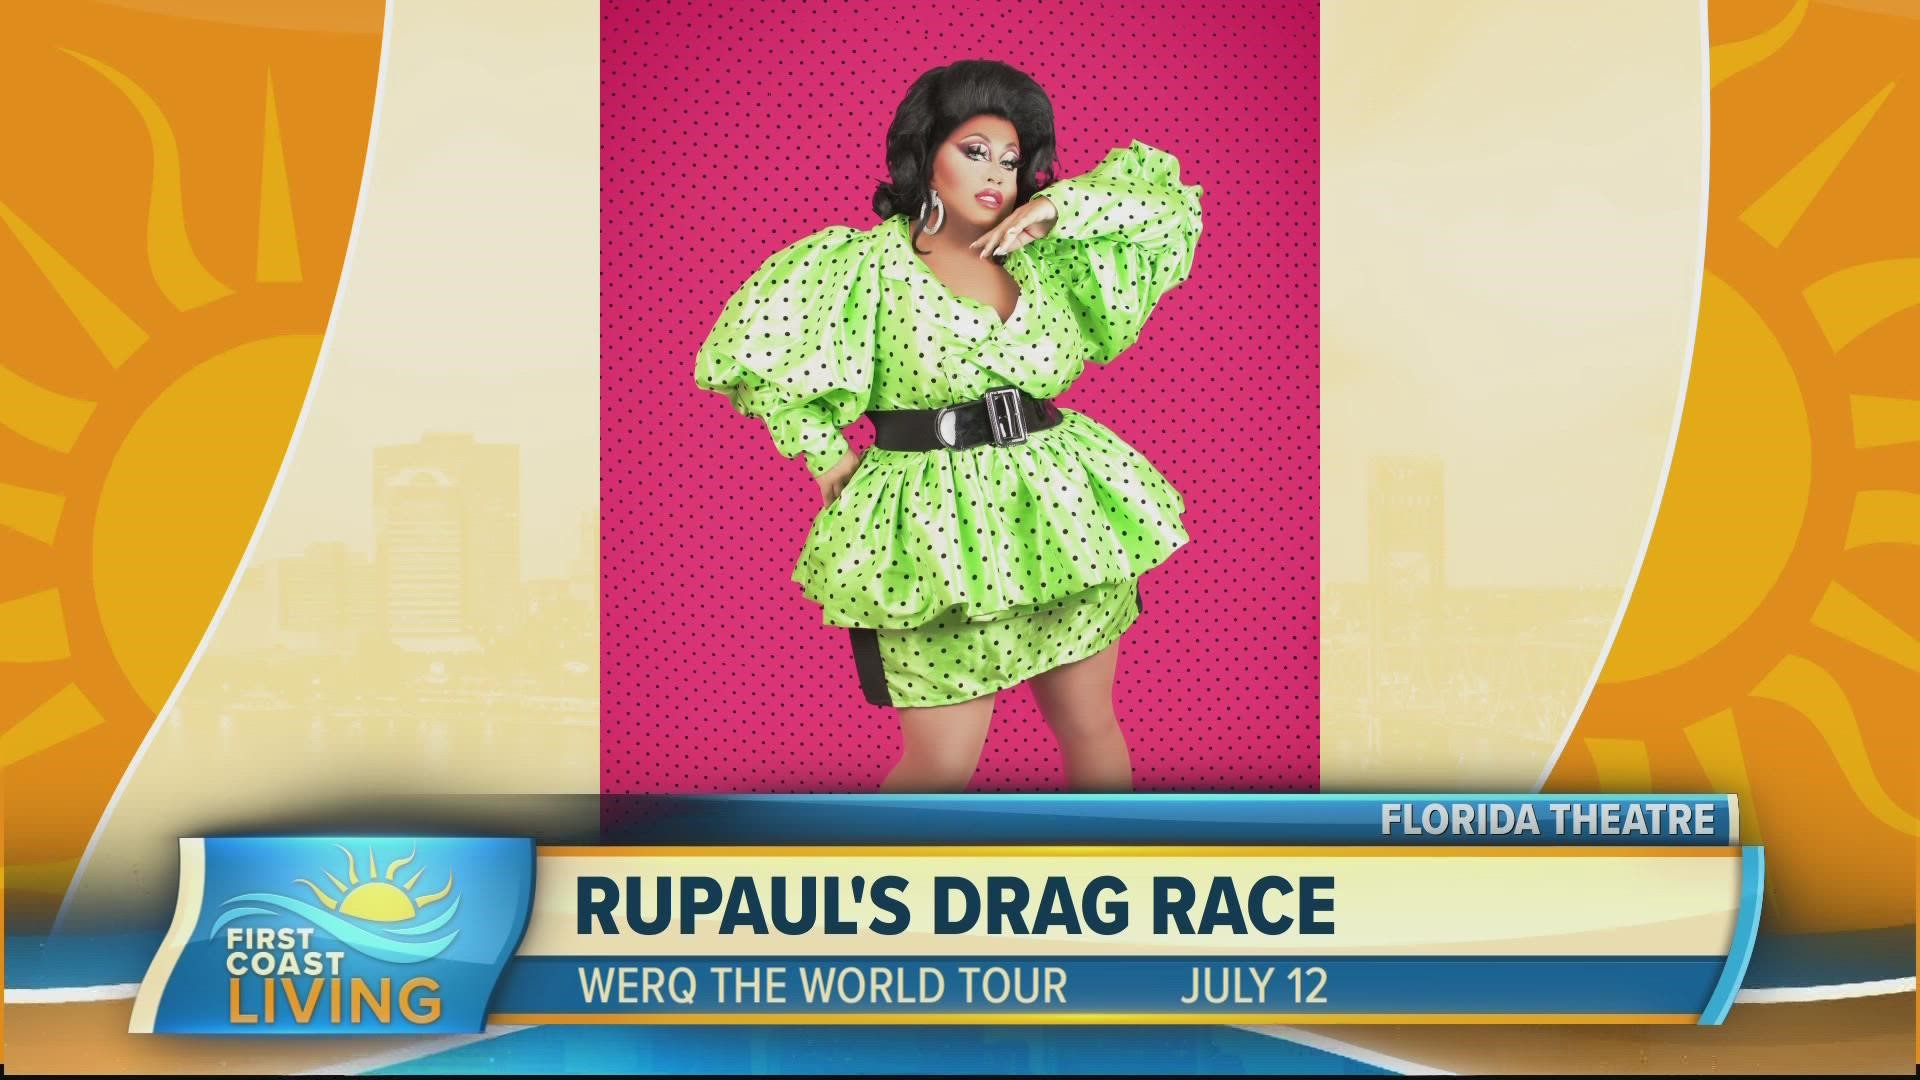 The Official RuPaul’s Drag Race World Tour returns with an all-new production for 2022! Hear from one of the stars, Deja Skye.